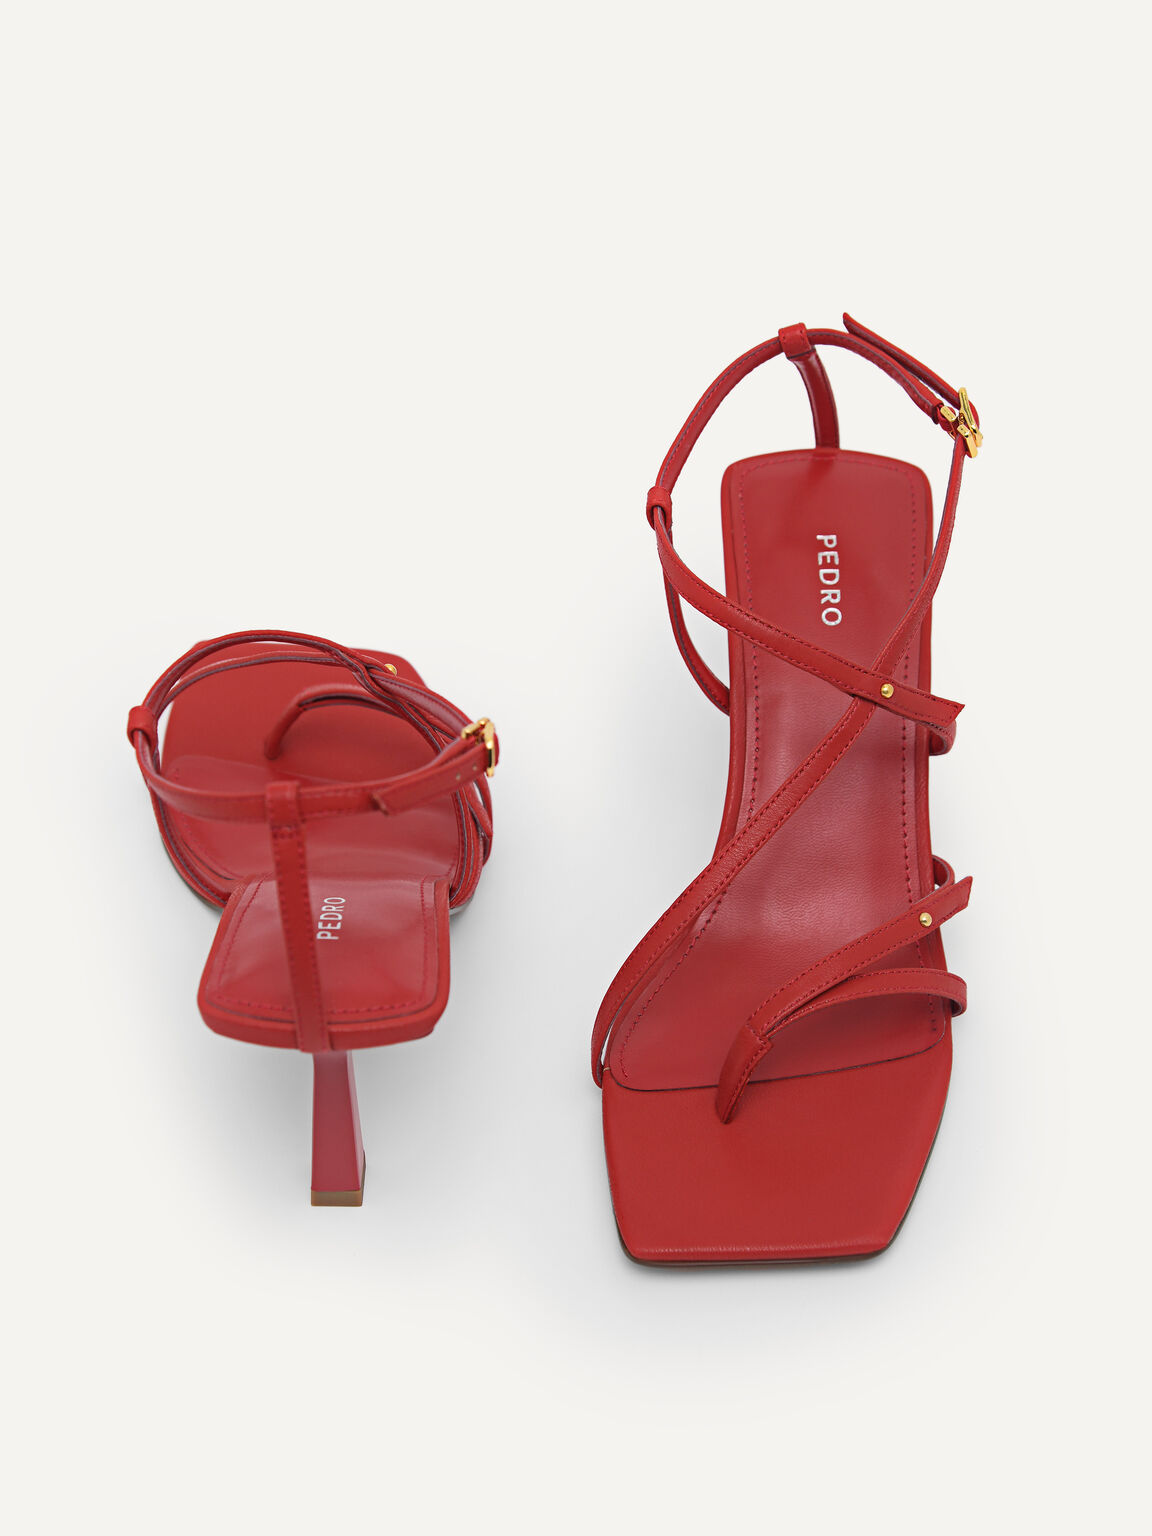 Strappy Heeled Sandals, Red